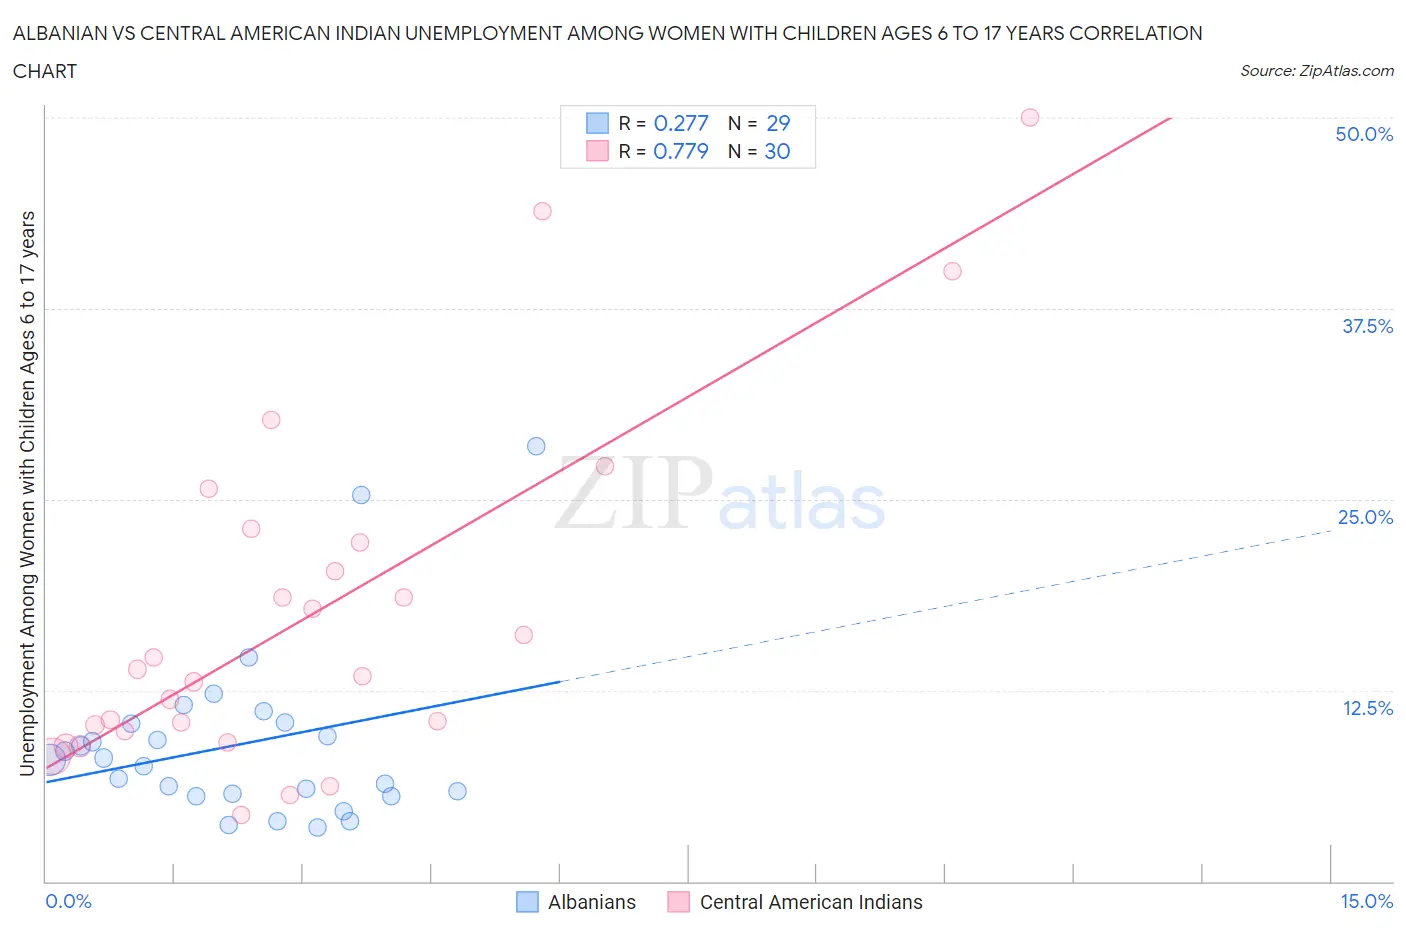 Albanian vs Central American Indian Unemployment Among Women with Children Ages 6 to 17 years